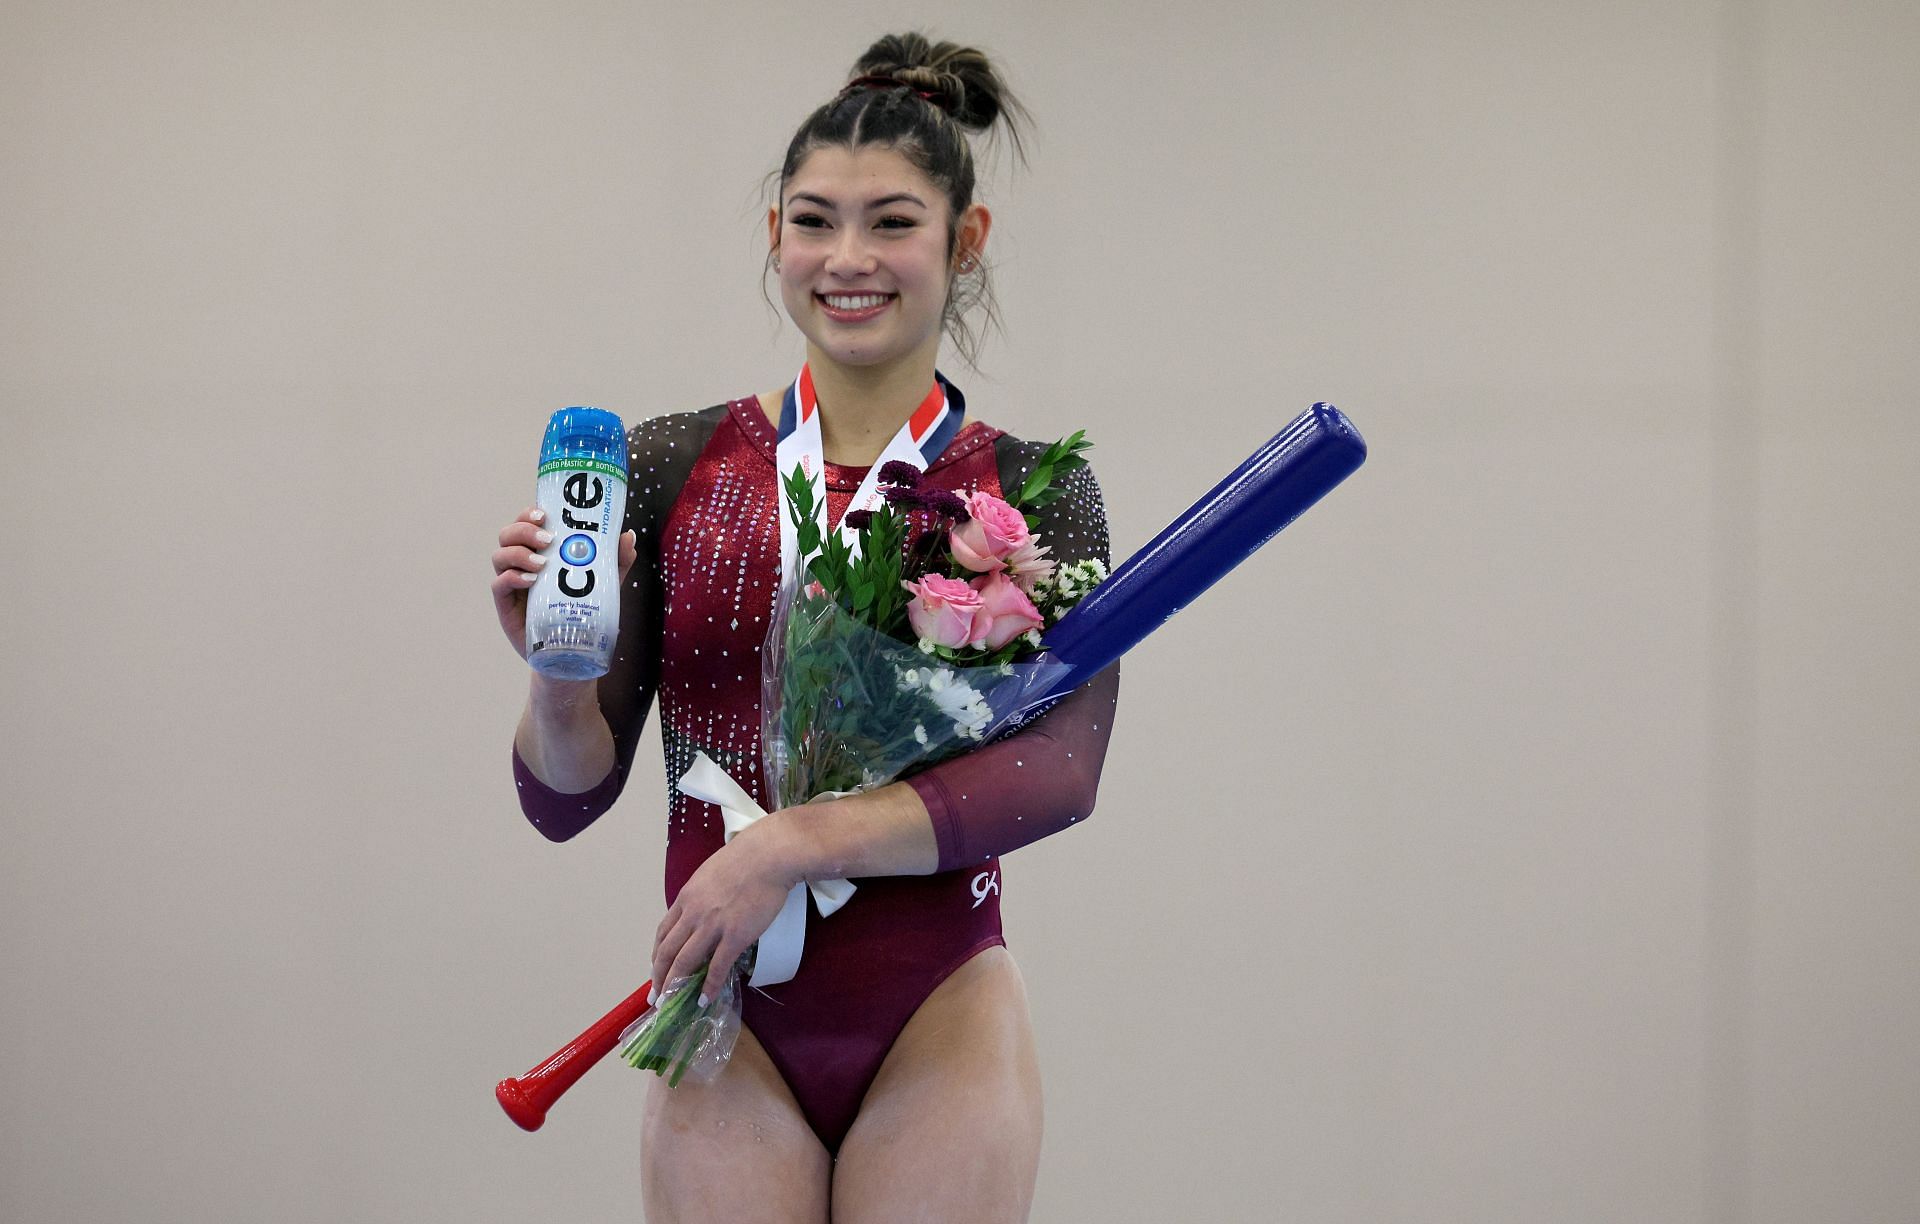 Kayla DiCello on the podium after winning the All-Around of the Senior Women at the 2024 USA Gymnastics Winter Cup at Kentucky International Convention Center in Louisville, Kentucky.